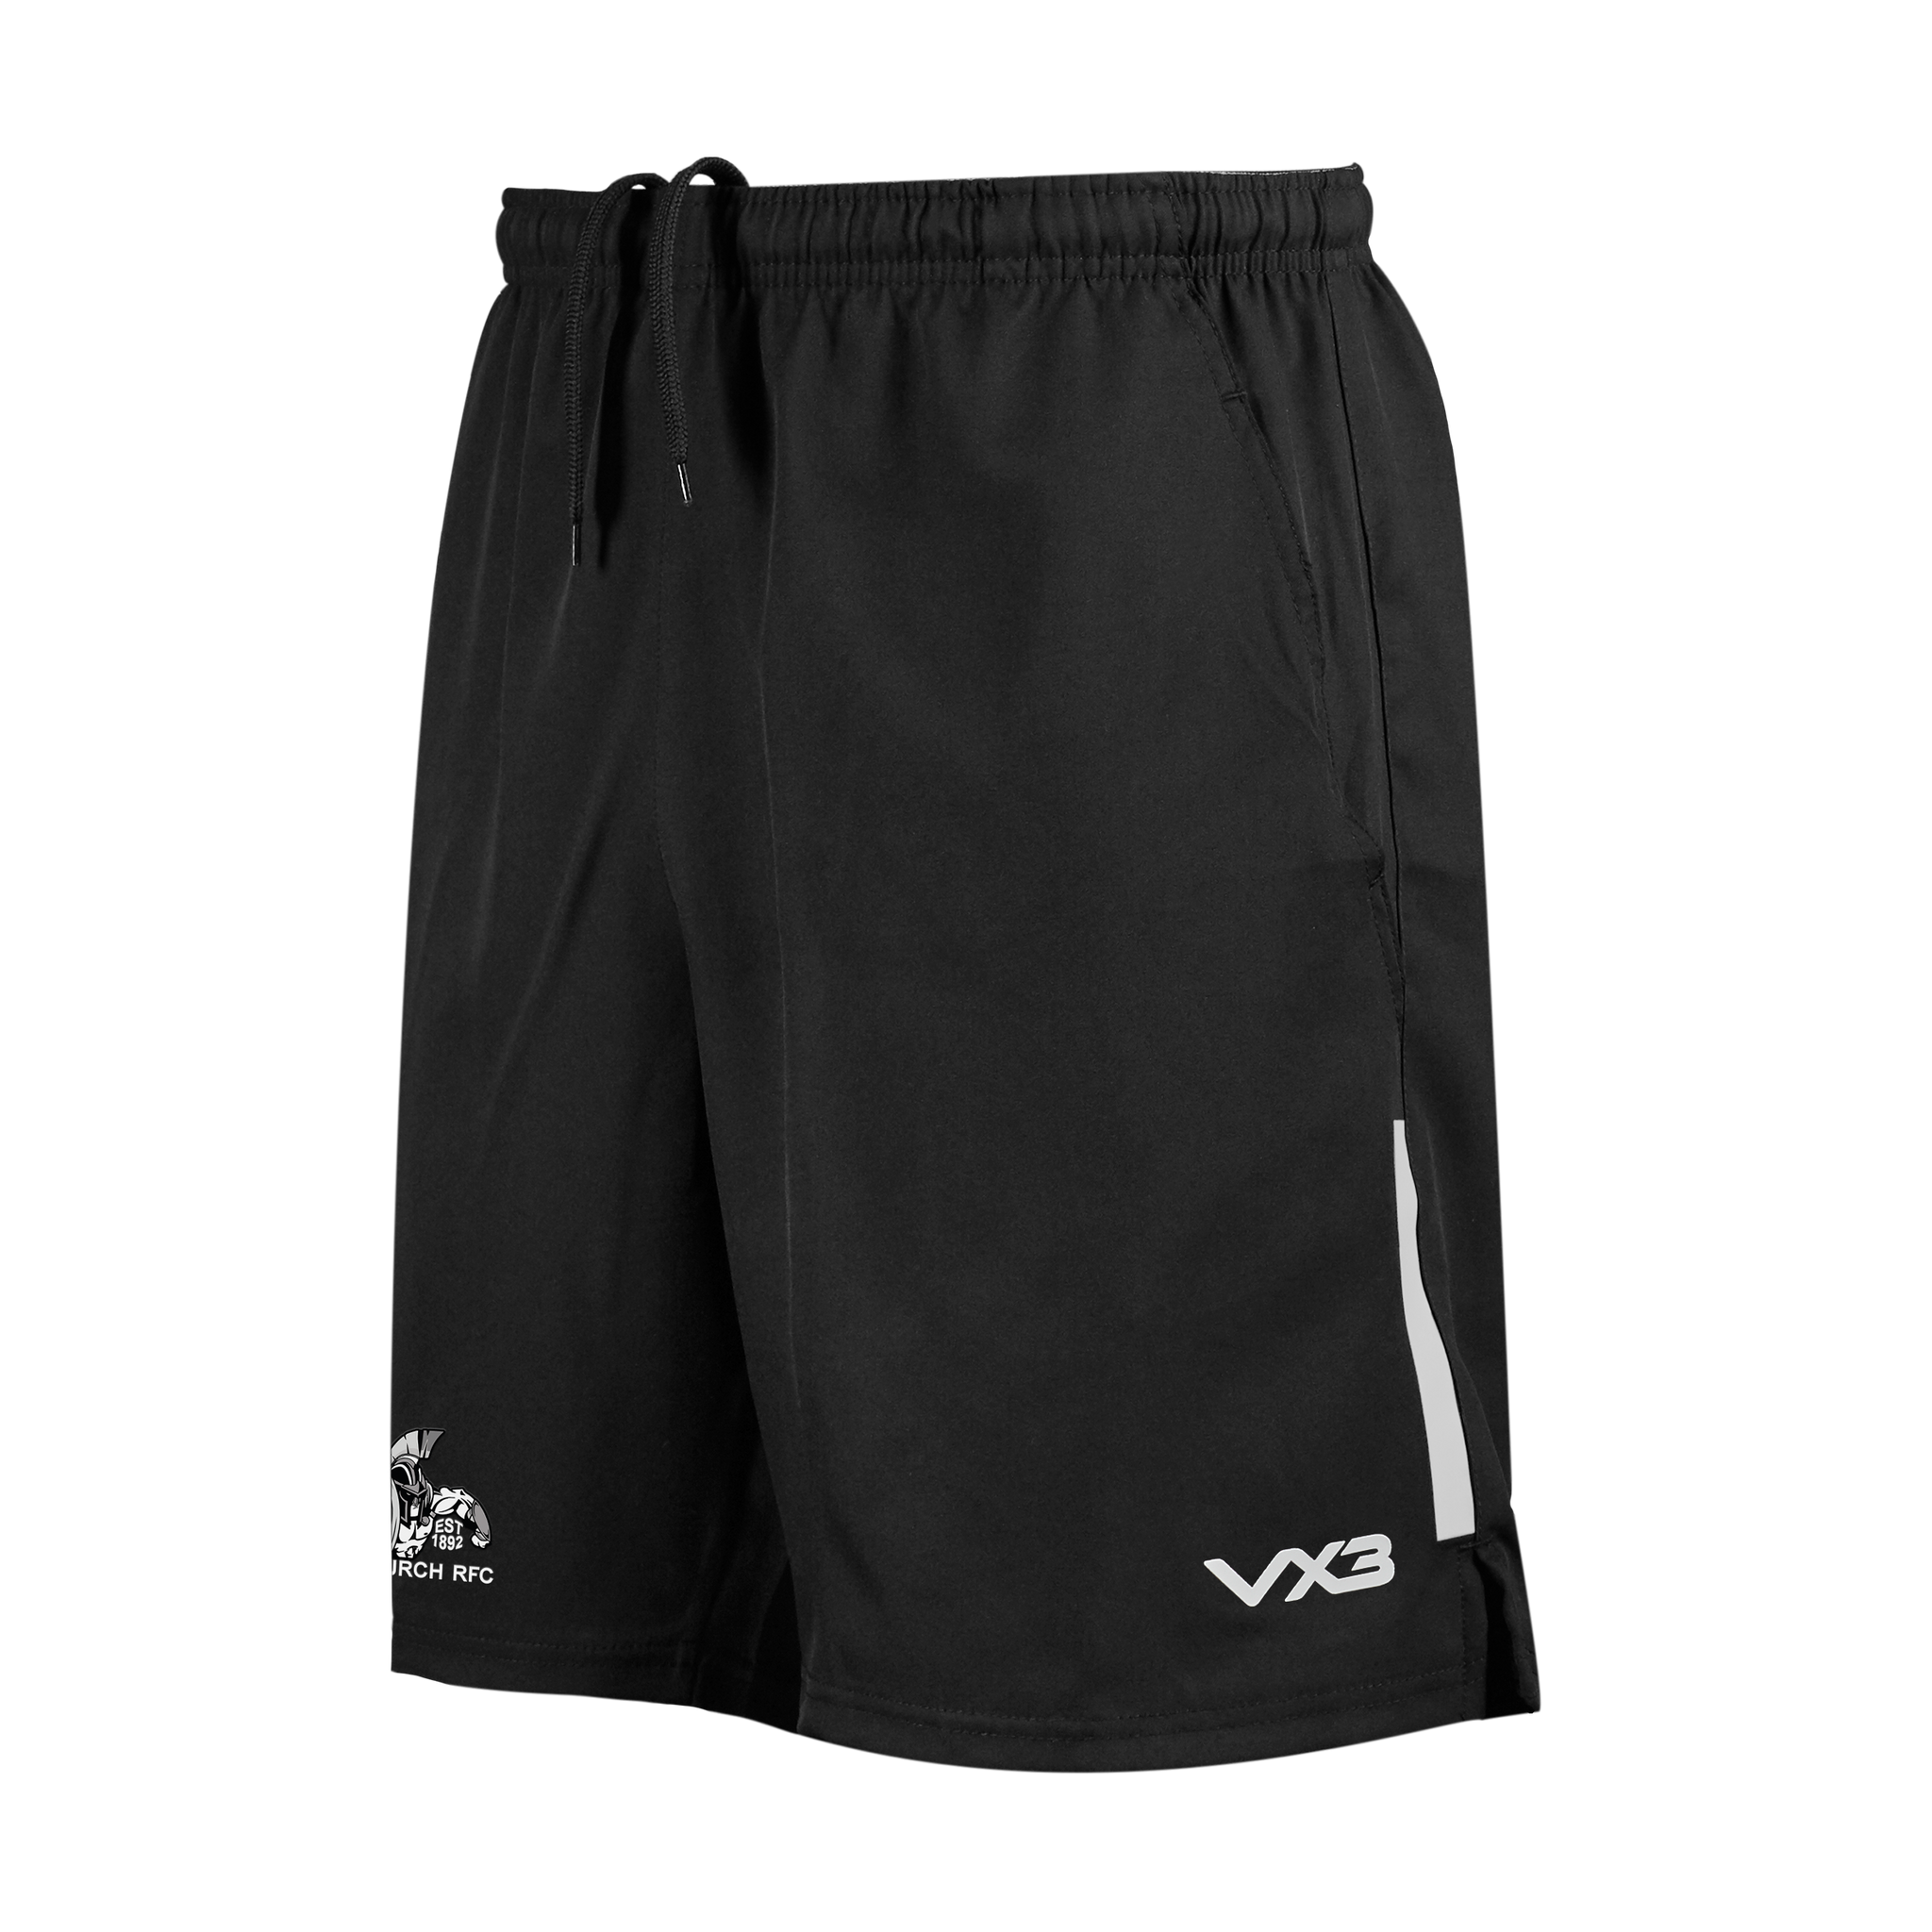 Whitchurch RFC Fortis Travel Shorts